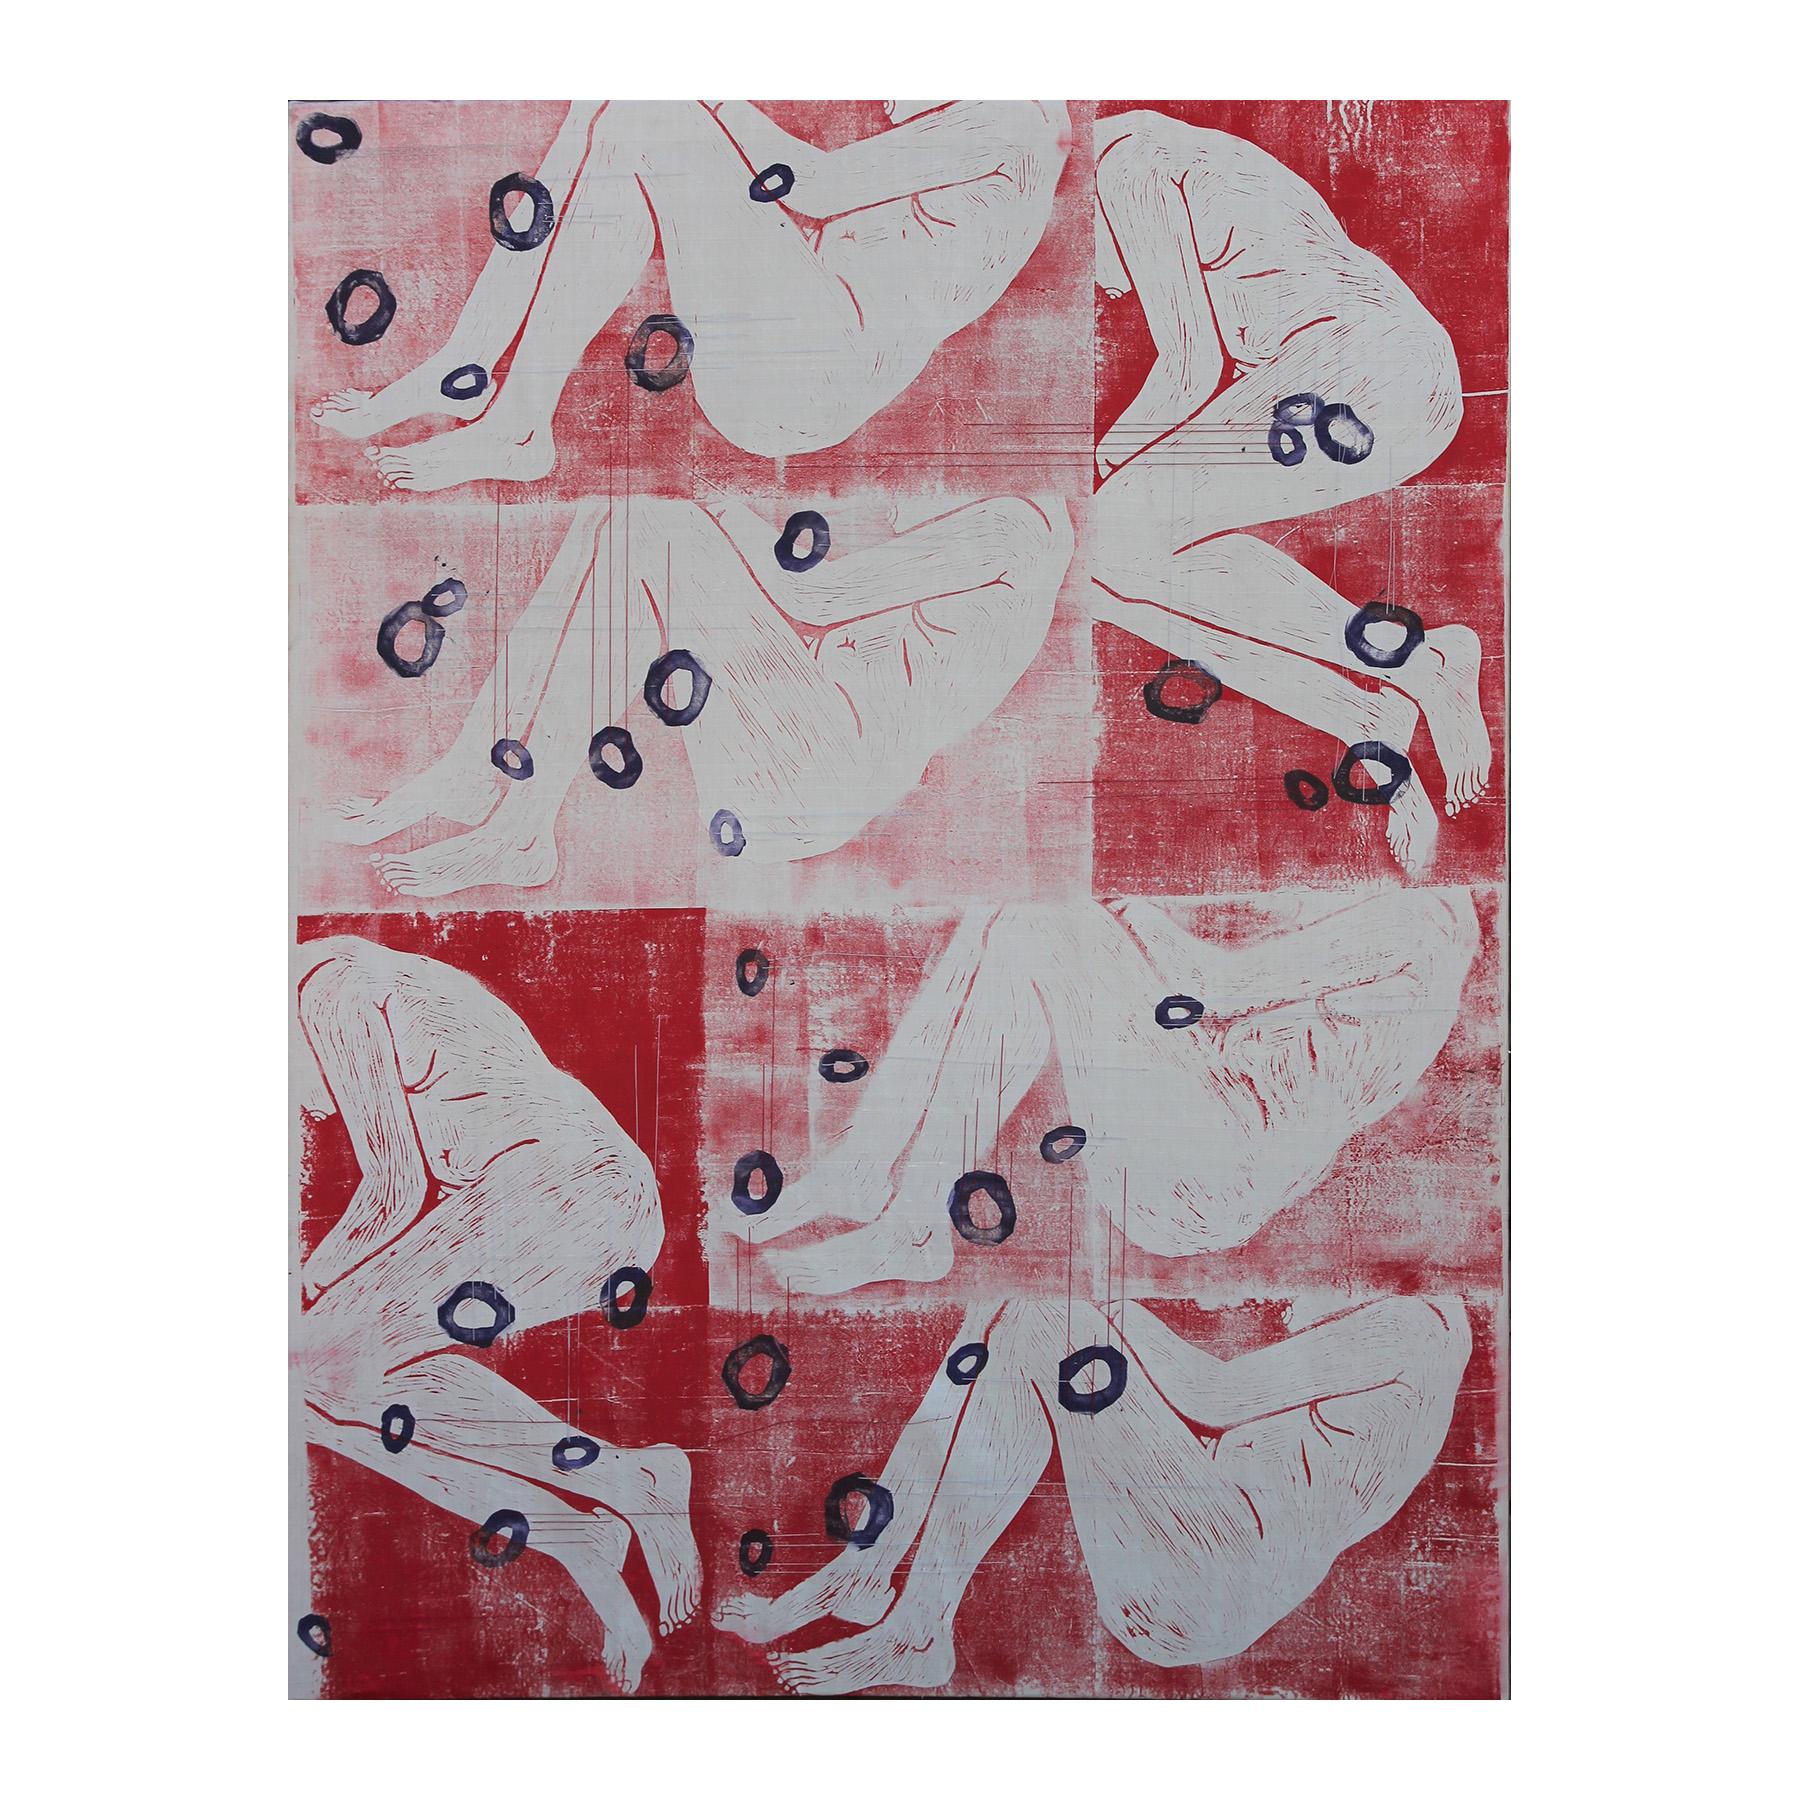 Rebecca Nall Abstract Painting - Modern Abstract Red & White Figurative Mixed Media Painting with Thread Accents